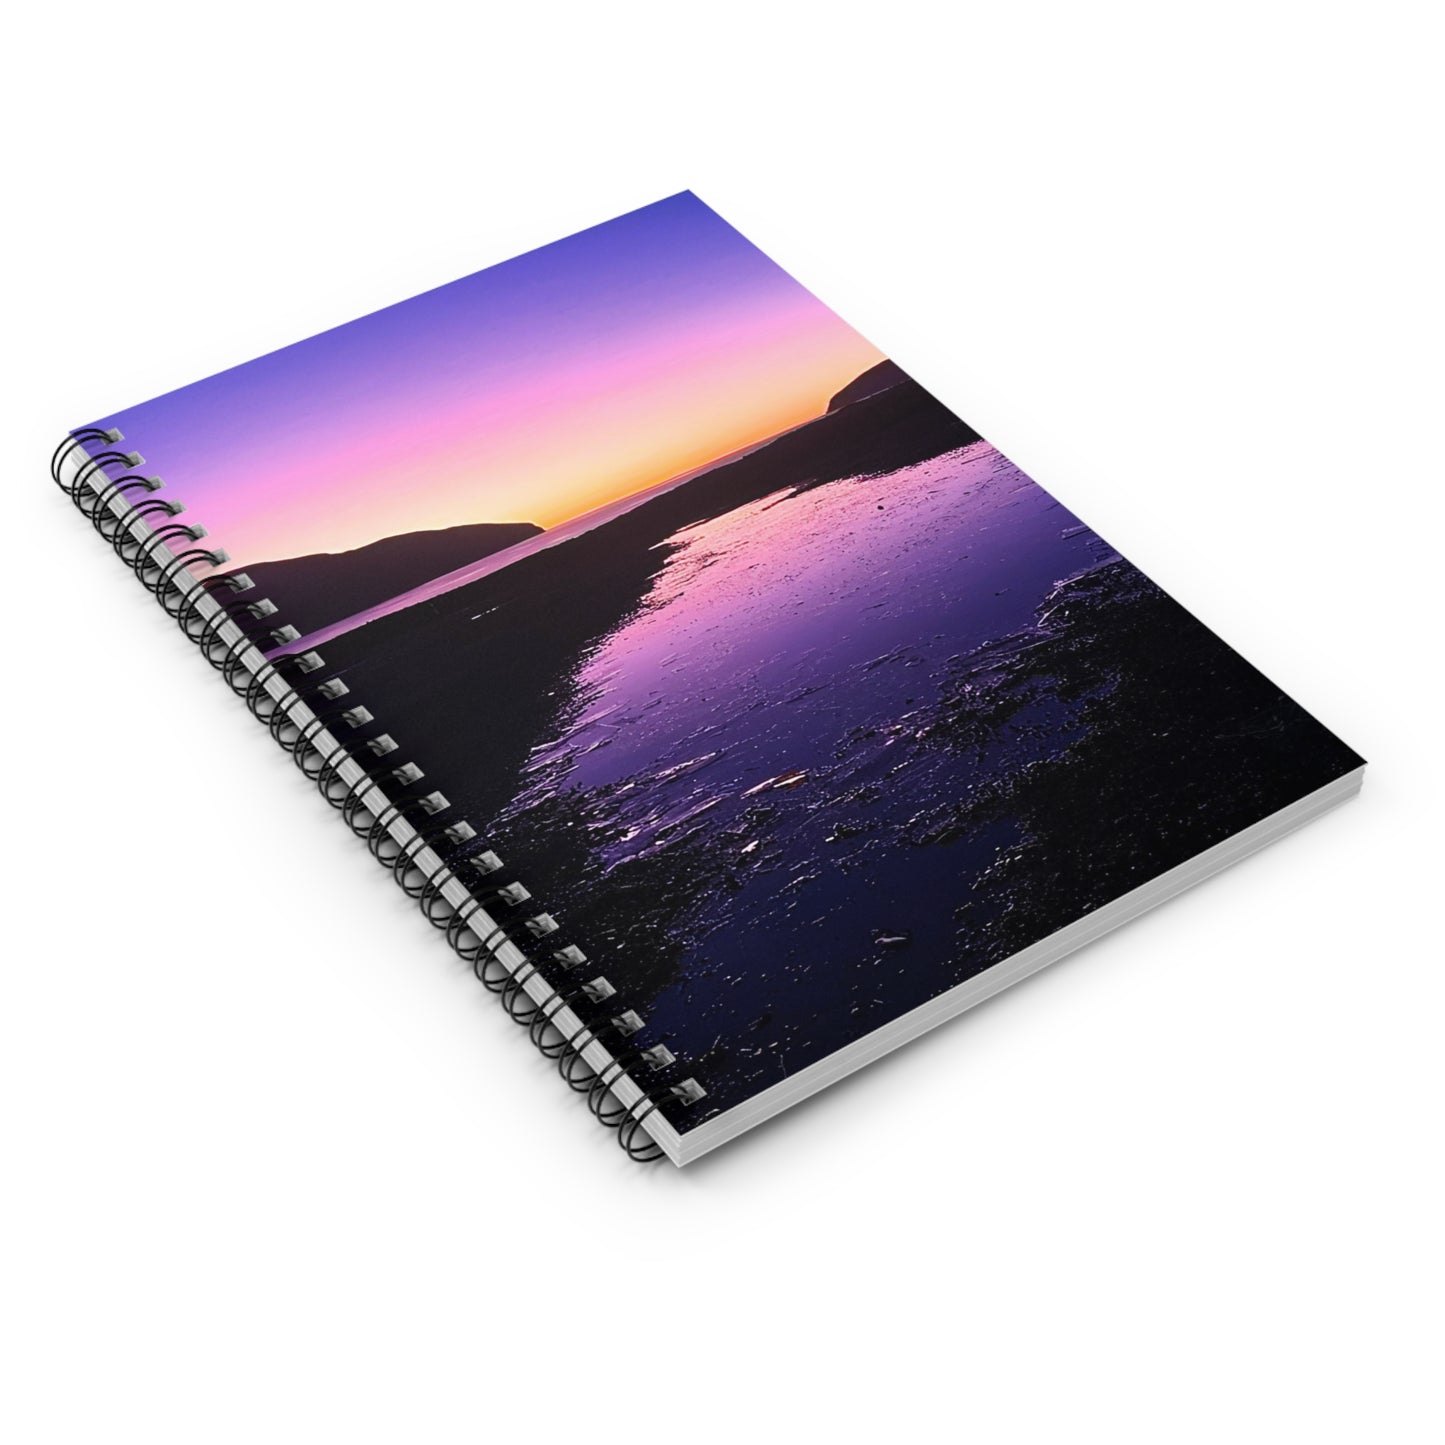 New Zealand Serene Sunrise - Icy Beach Landscape Spiral Notebook, Eco-Friendly, 118 Ruled Pages, Daily Notes and Journals